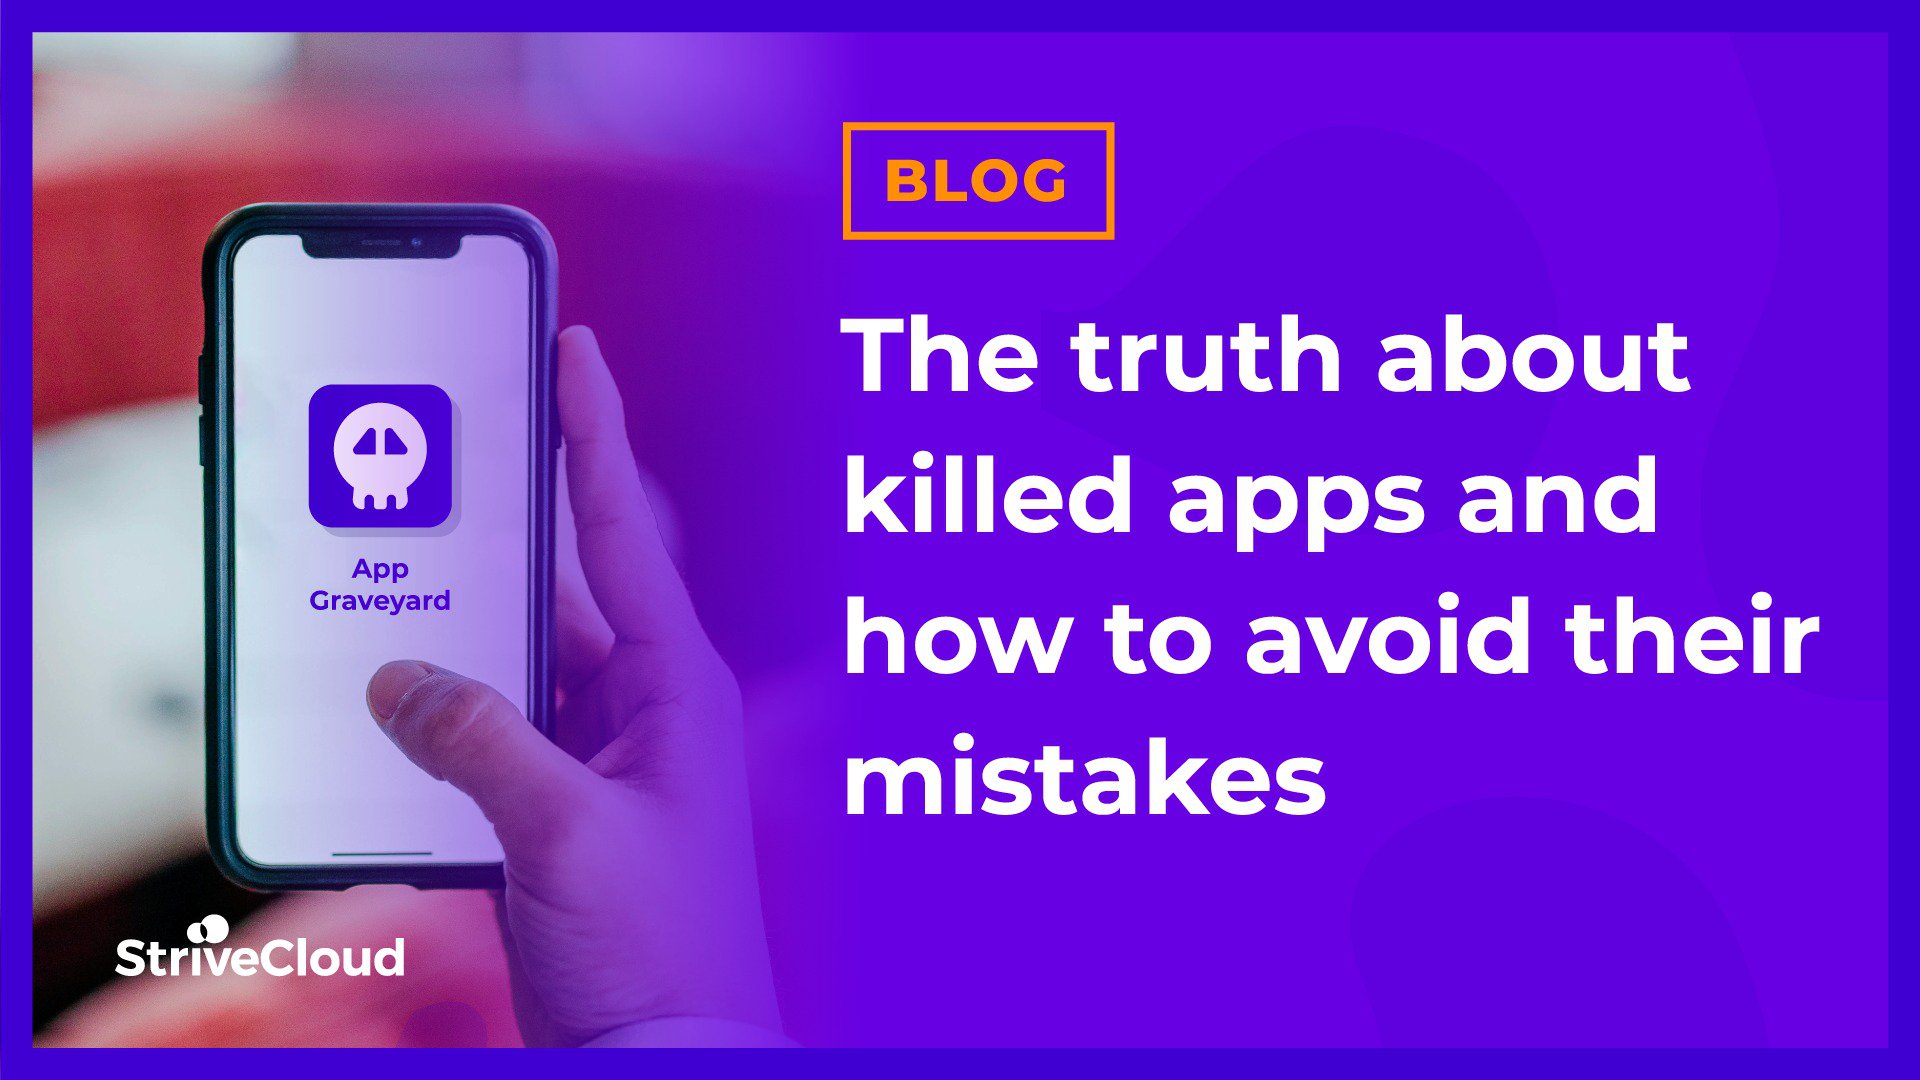 The truth about killed apps and how to avoid their mistakes